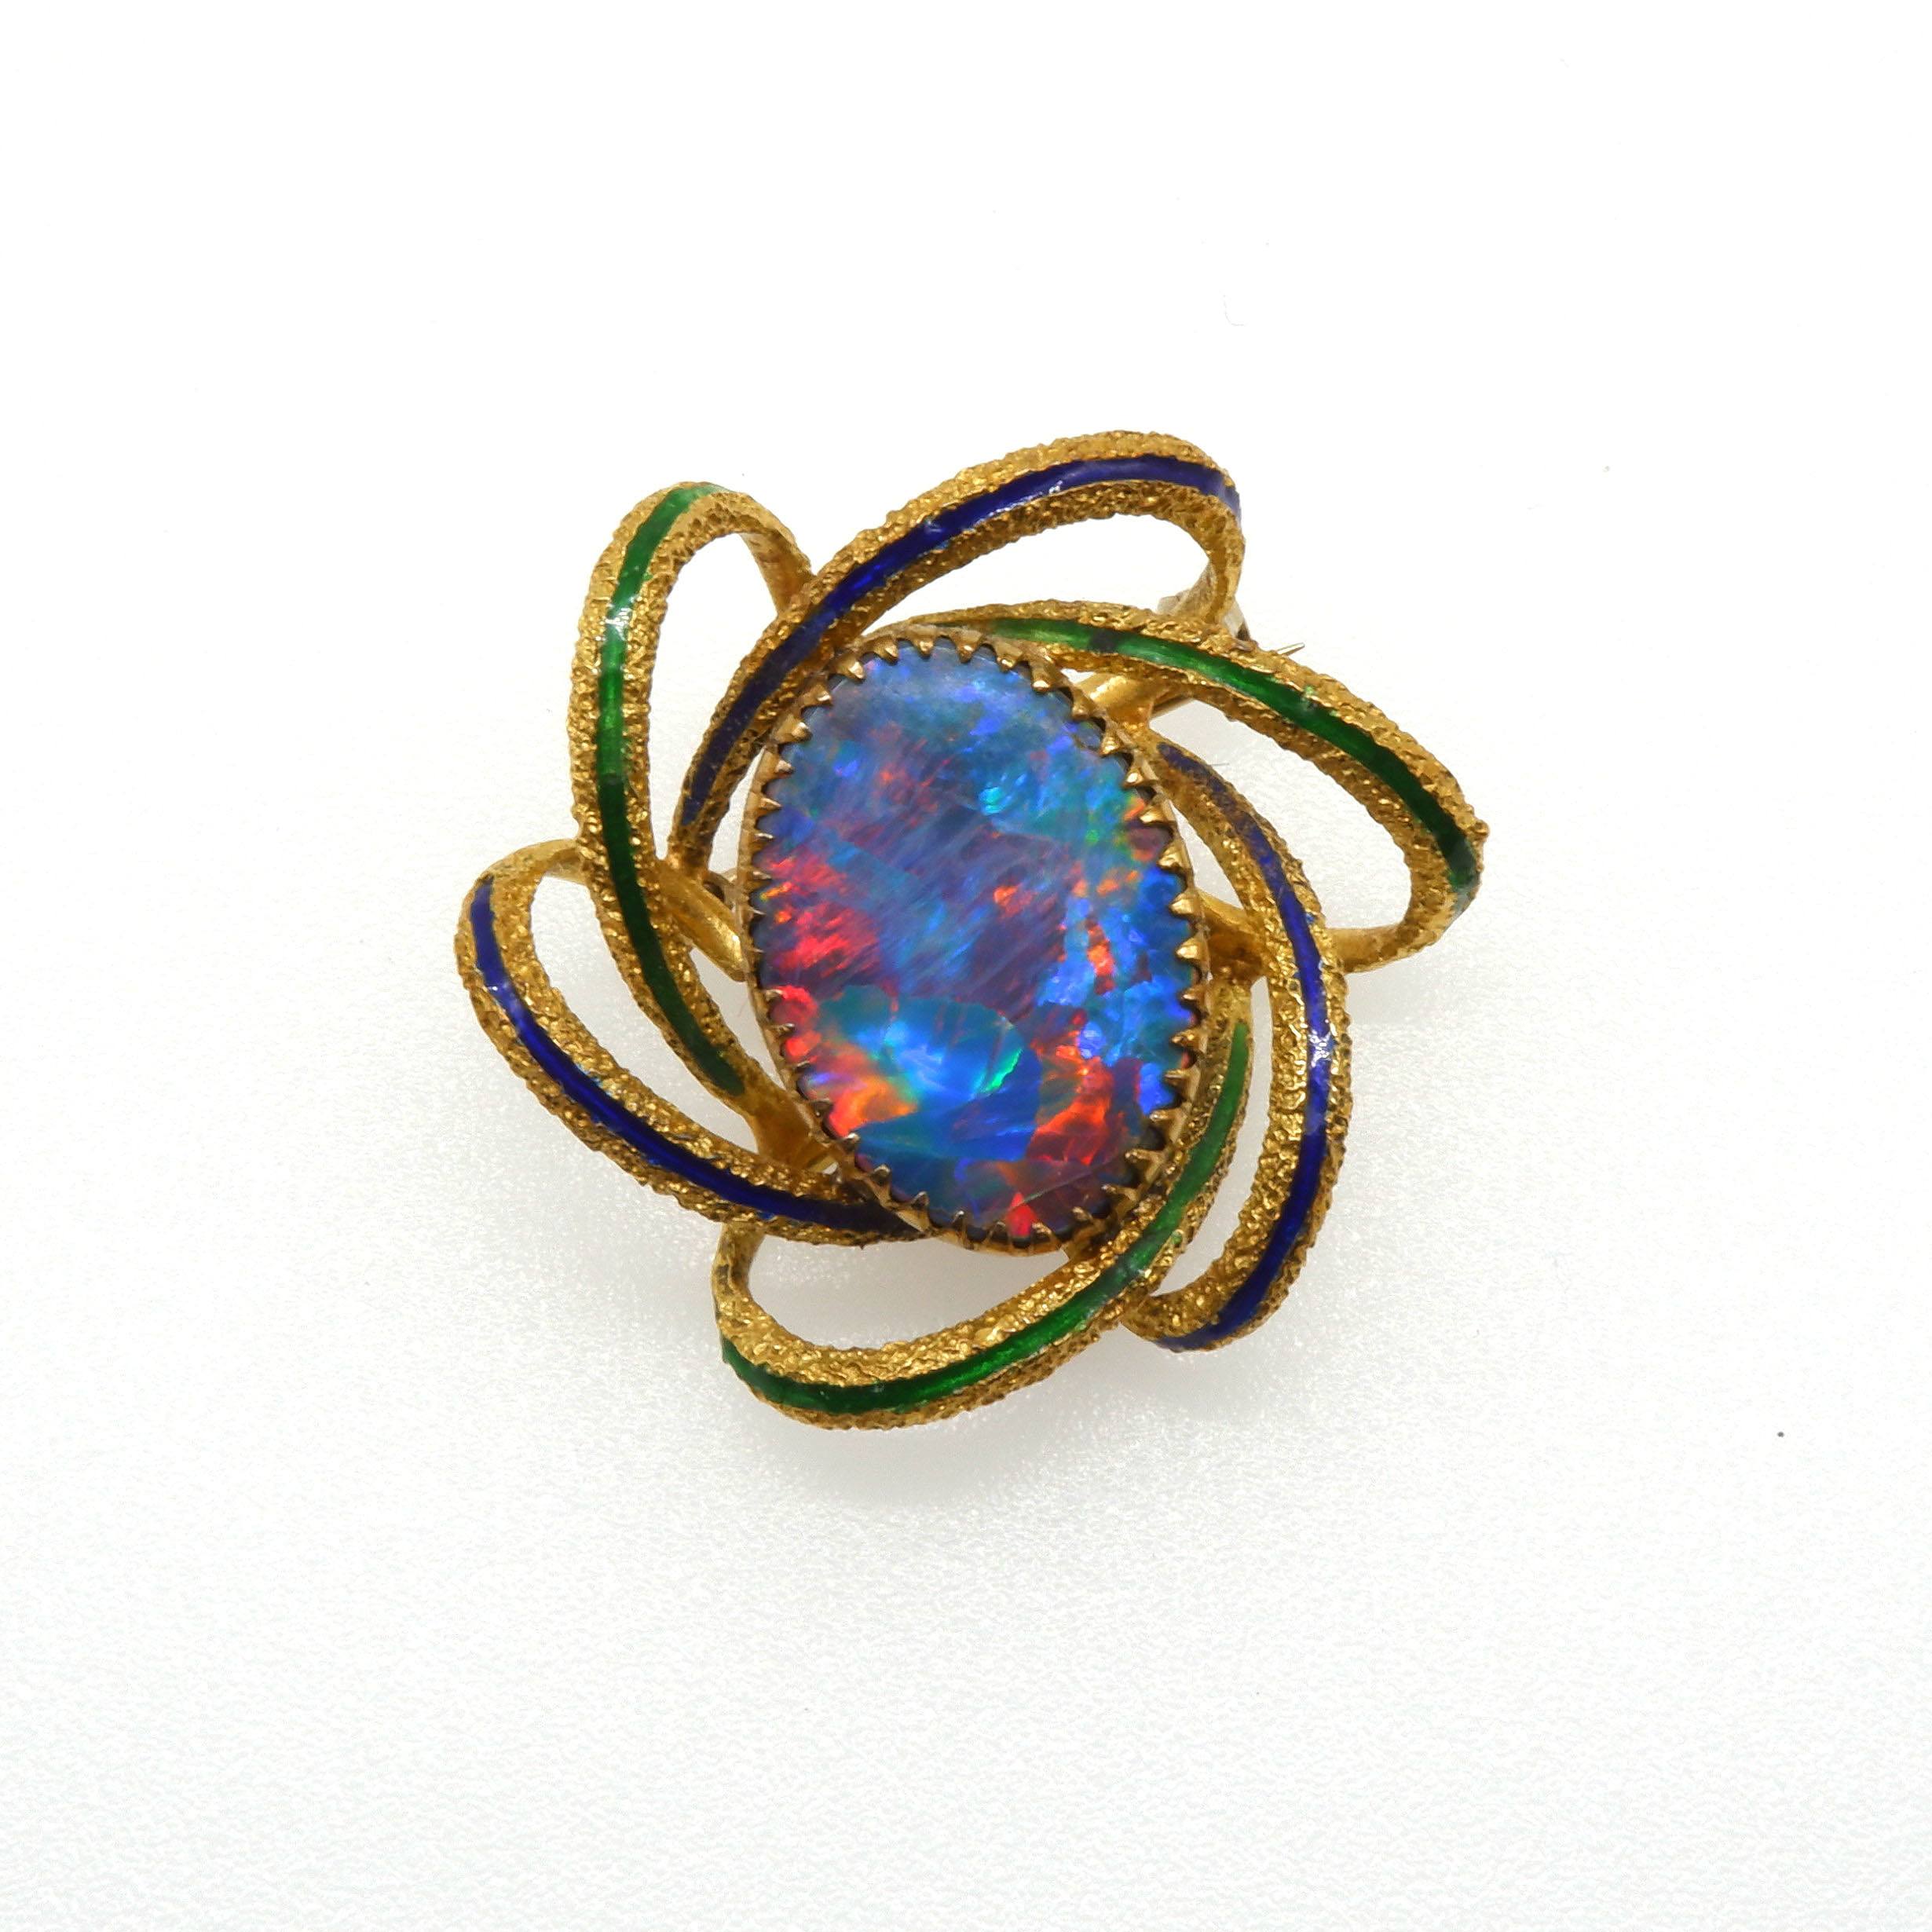 '18ct Yellow Gold Black Opal Doublet Brooch with Excellent Play of Colour and Six Gold Wire Swirls with Blue and Green Enamelling Forming a Frame'